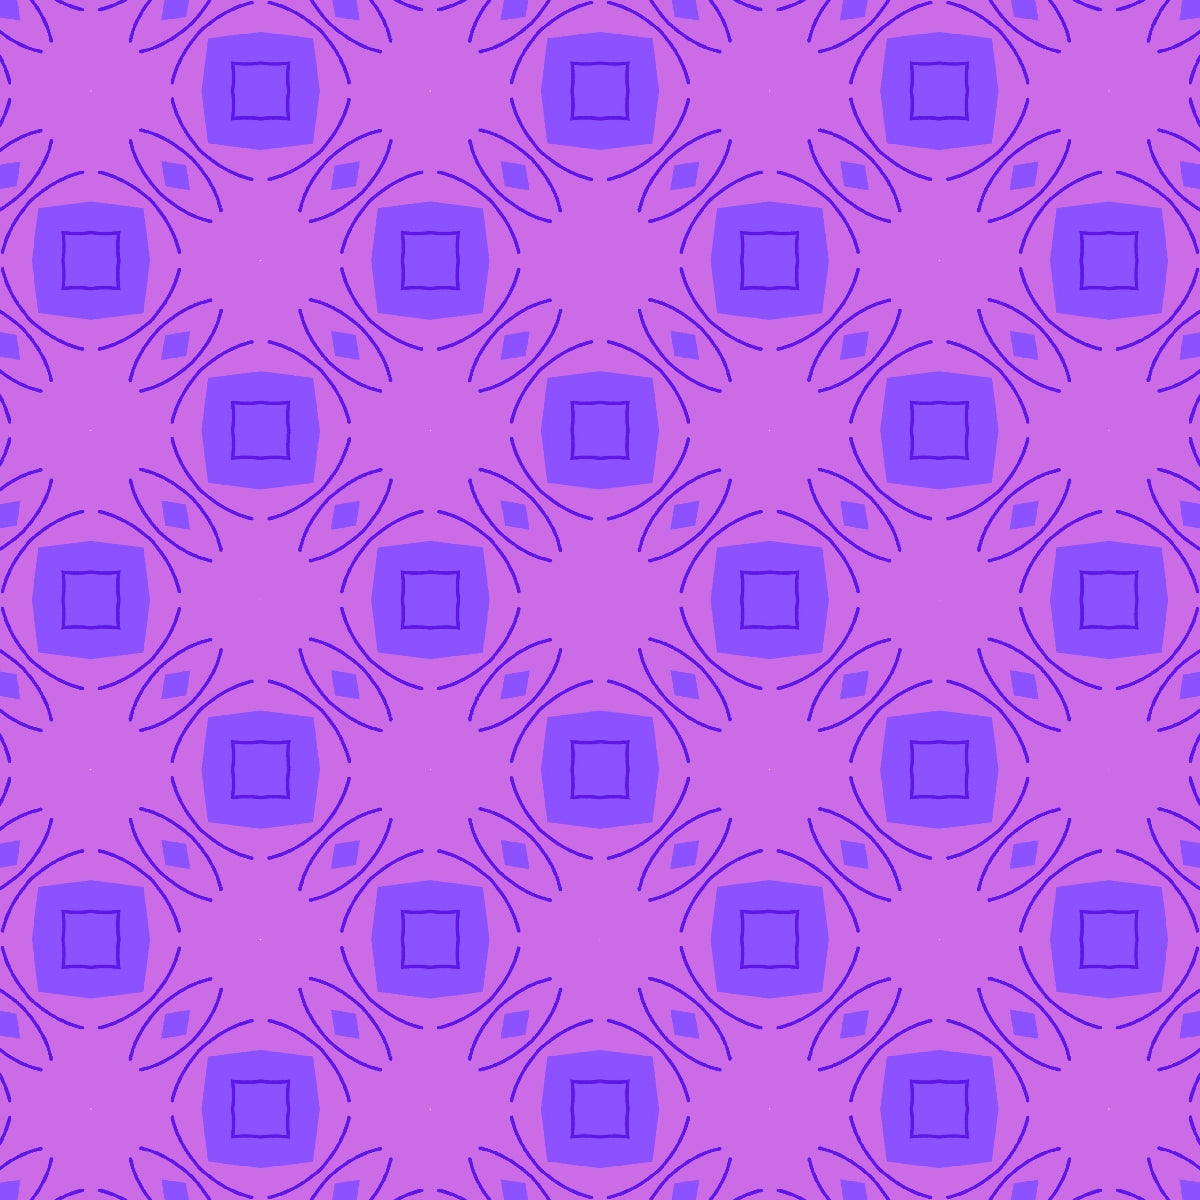 Purple Abstract Seamless Pattern 1.0 - Printable Scrapbook Paper 